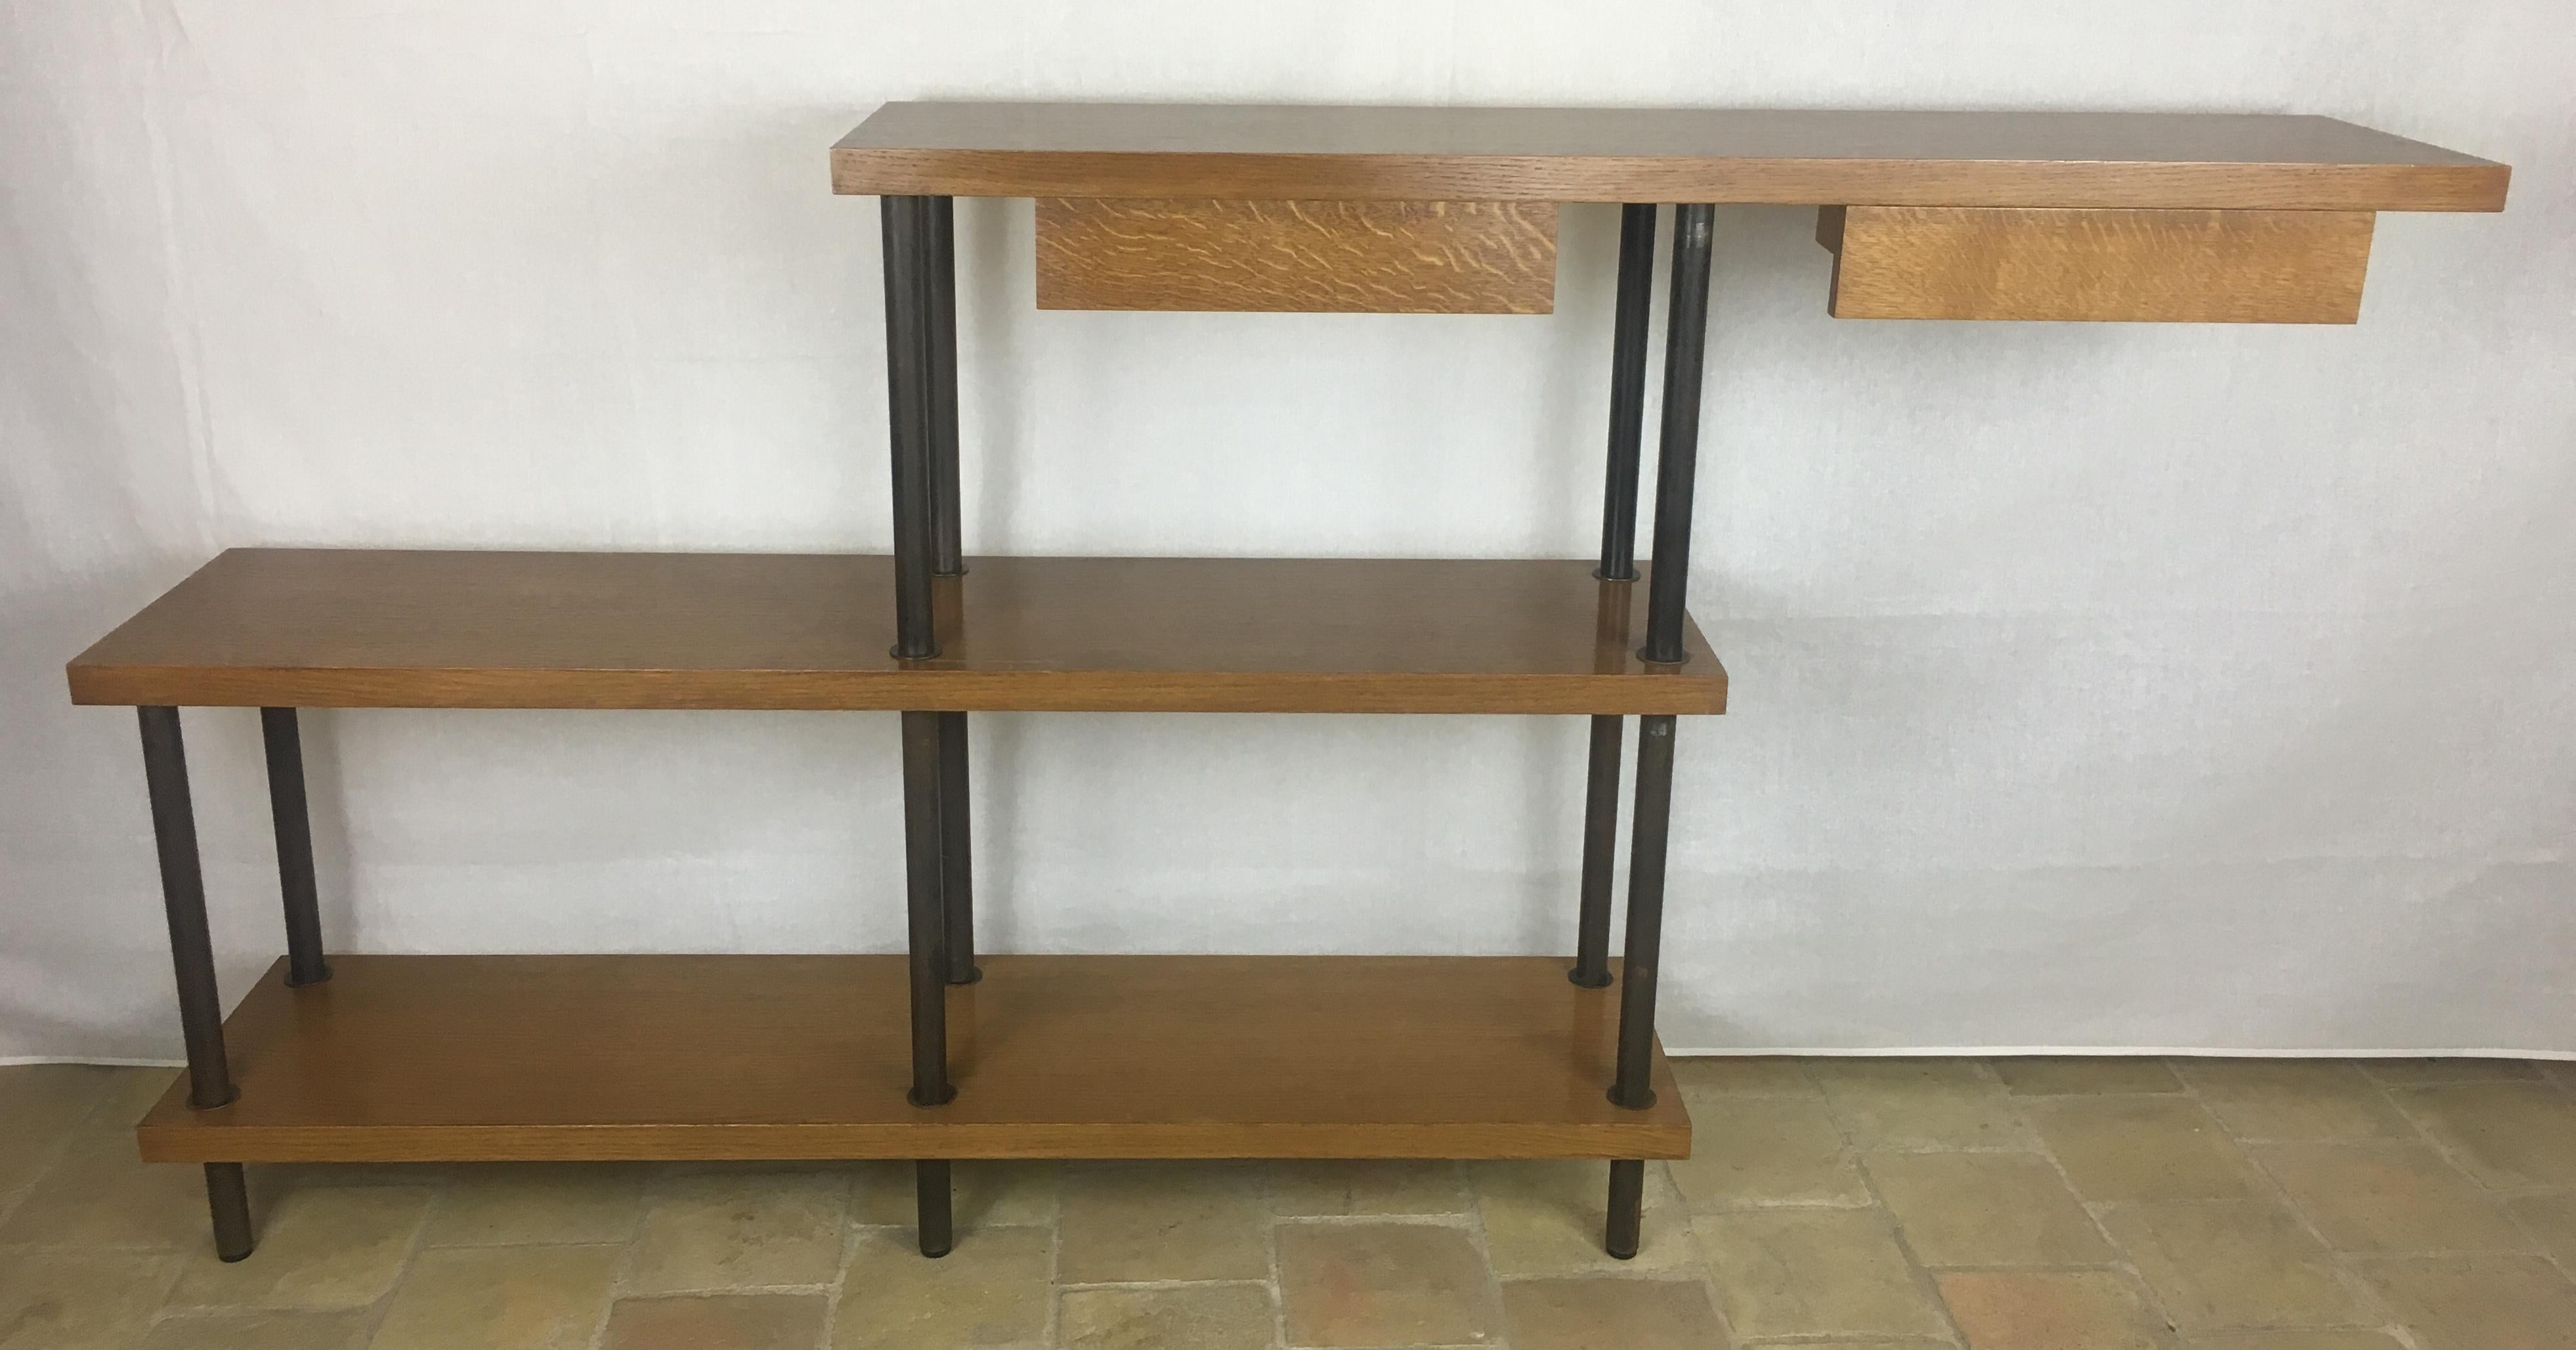 Mid-Century Modern Mid-Century Three-Tiered Bookcase or Display Unit in Solid Oak and Iron